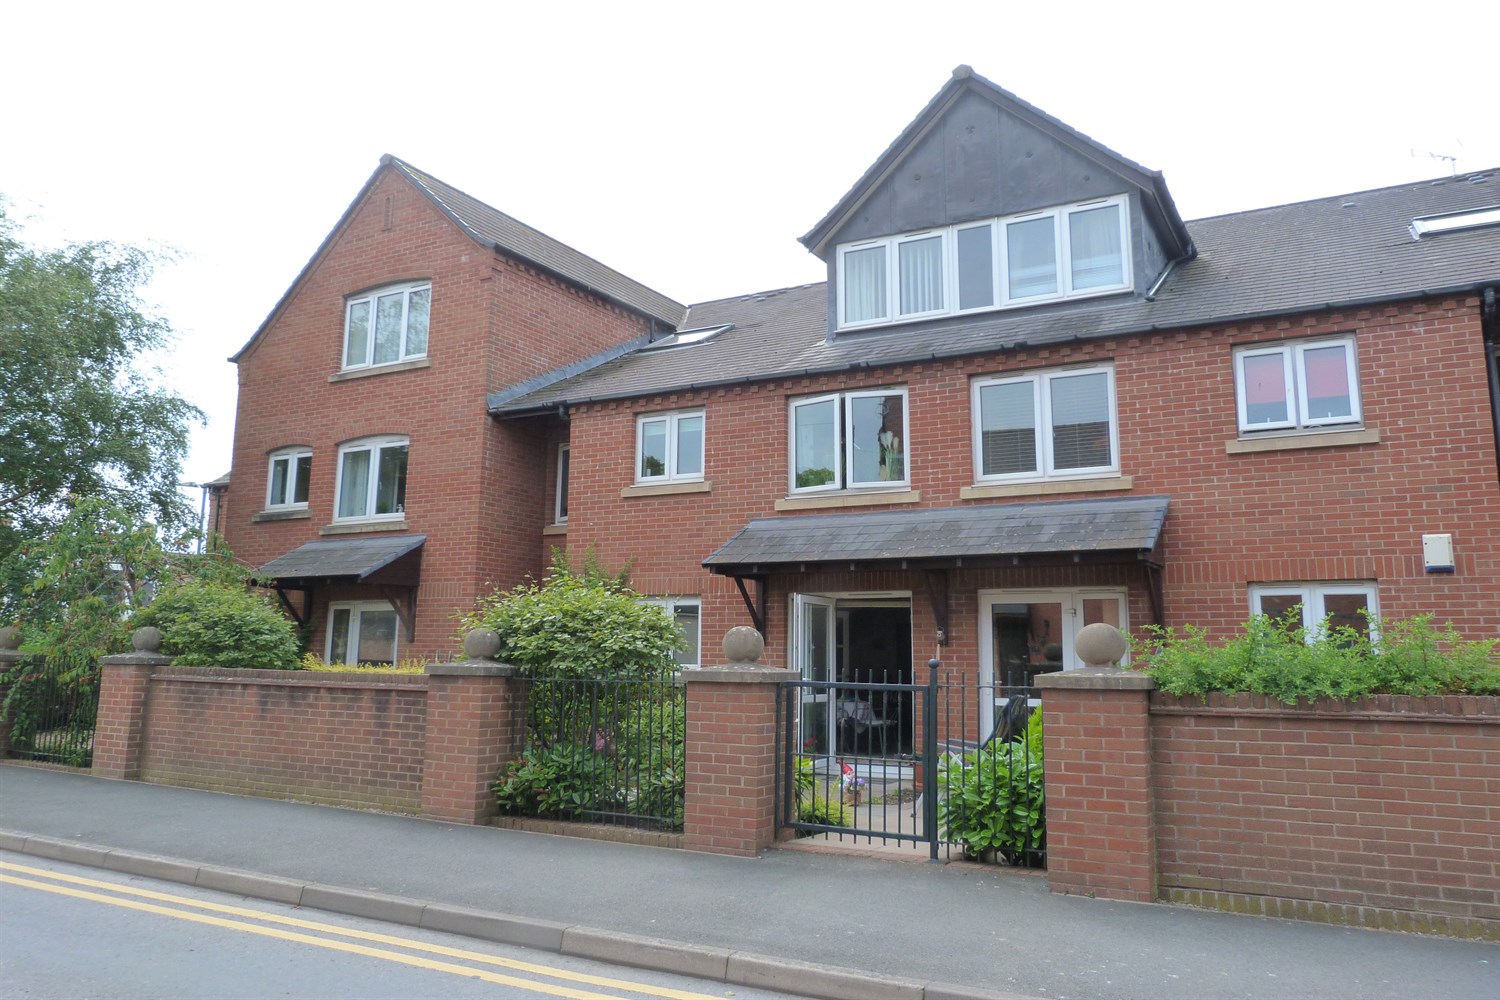 39 Watkins Court, Old Mill Close, Hereford